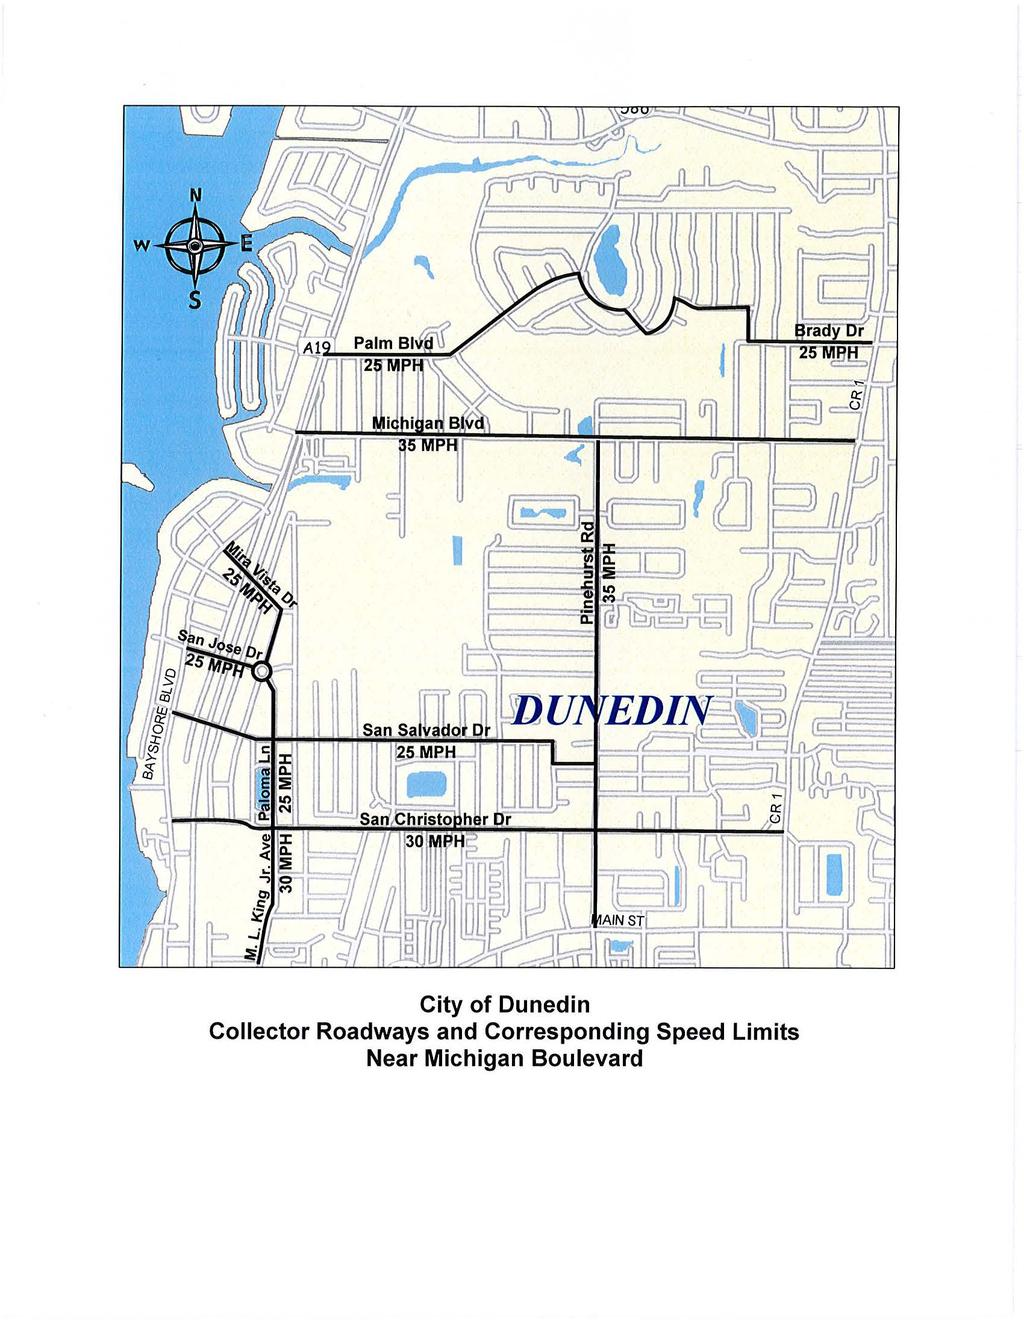 City of Dunedin Collector Roadways and